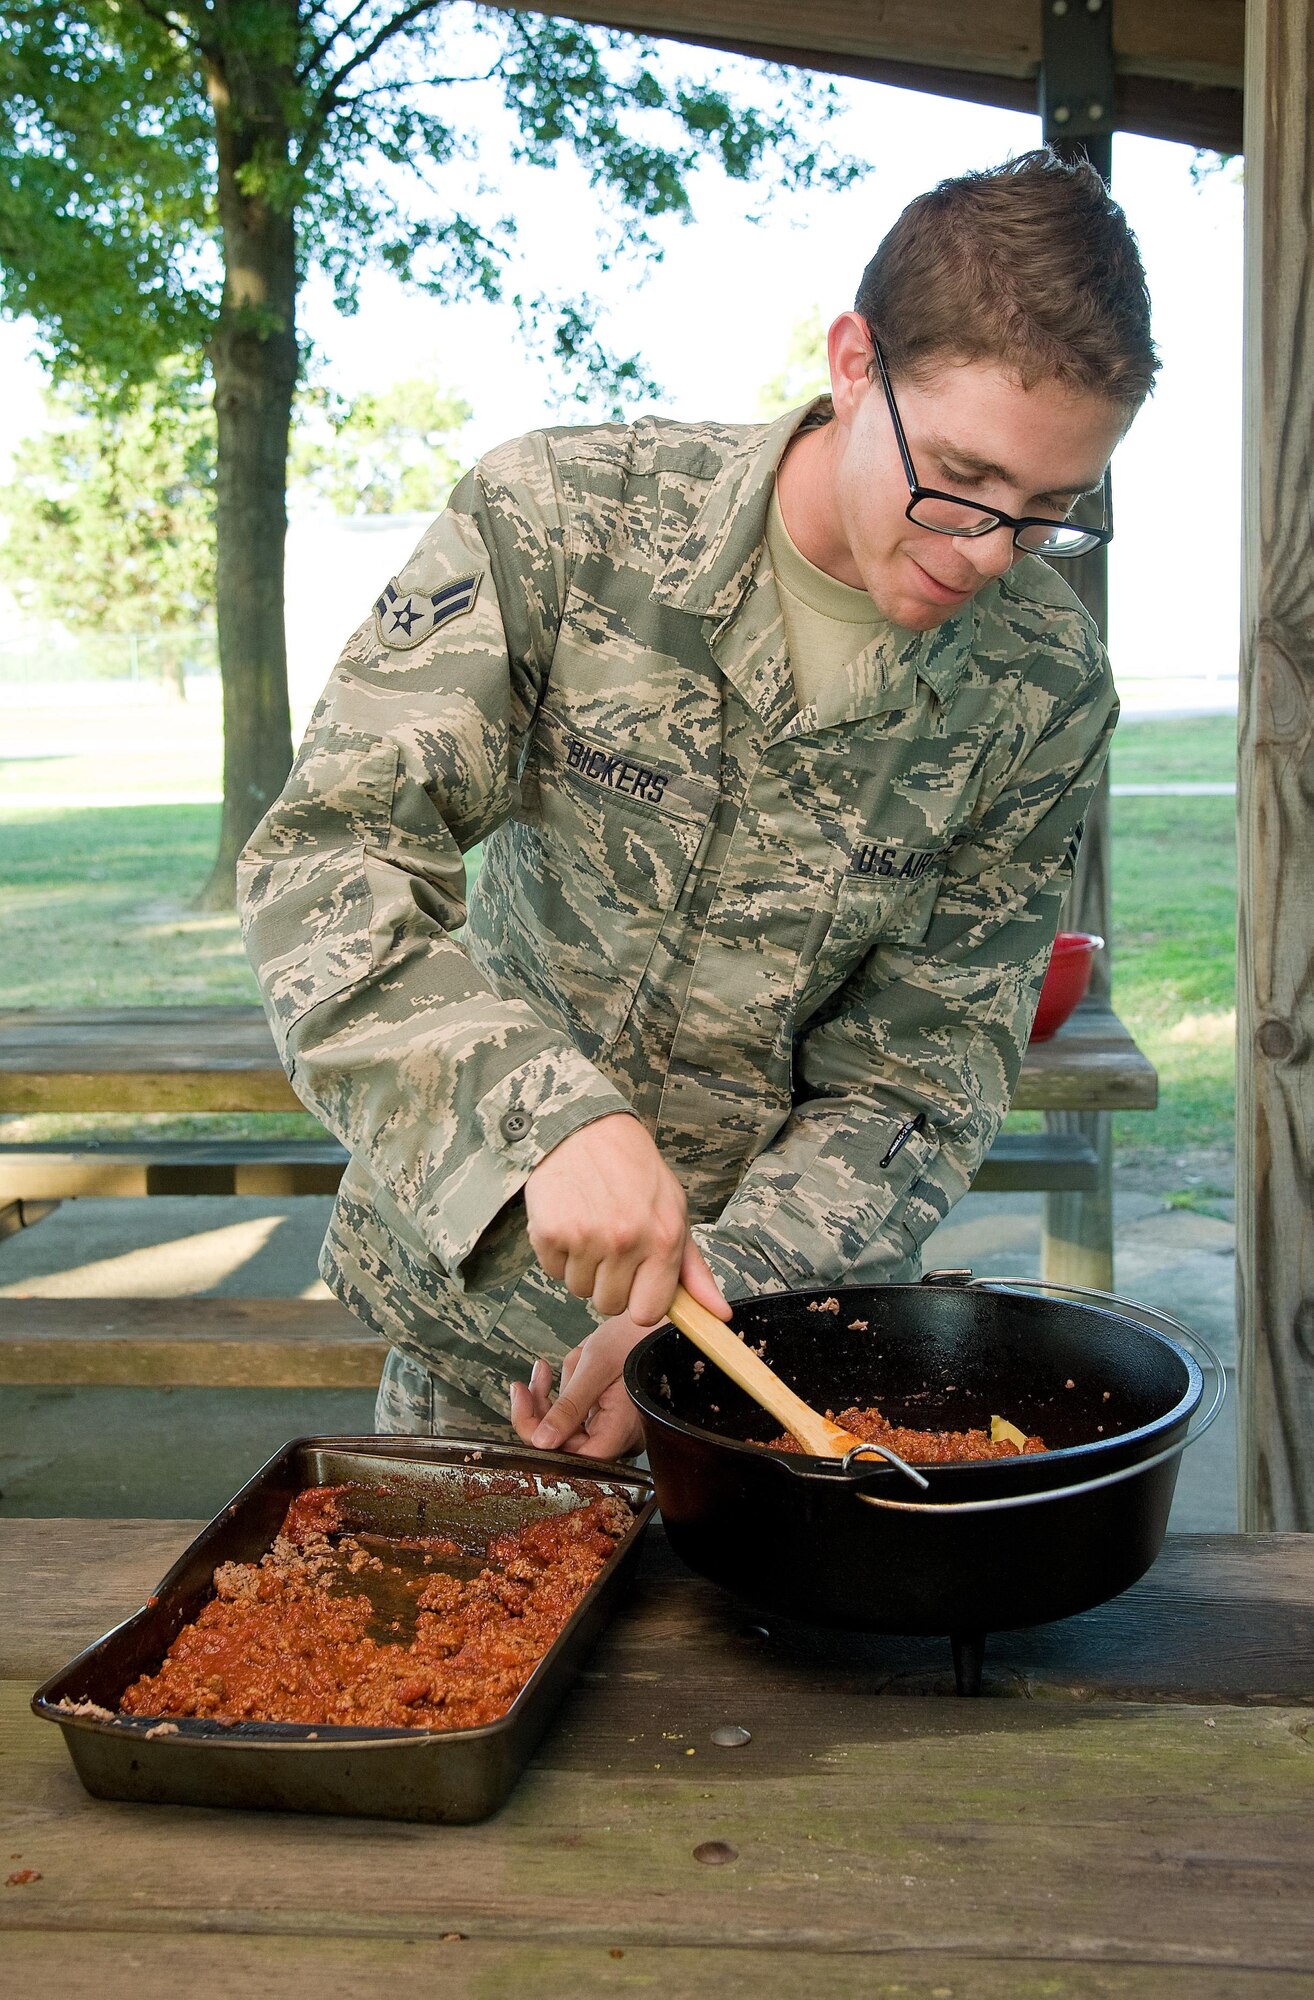 Airman 1st Class Dylan Bickers, 436th Aerospace Medicine Squadron, places cooked ground beef for lasagna in a Dutch oven Sept. 13, 2016, at the Eagle’s Nest picnic area on Dover Air Force Base, Del. Senior Airman William Johnson, 436th Airlift Wing Public Affairs photojournalist, showed Bickers and other Dorm to Gourm participants how to prepare and cook lasagna using a Dutch oven. (U.S. Air Force photo by Roland Balik)